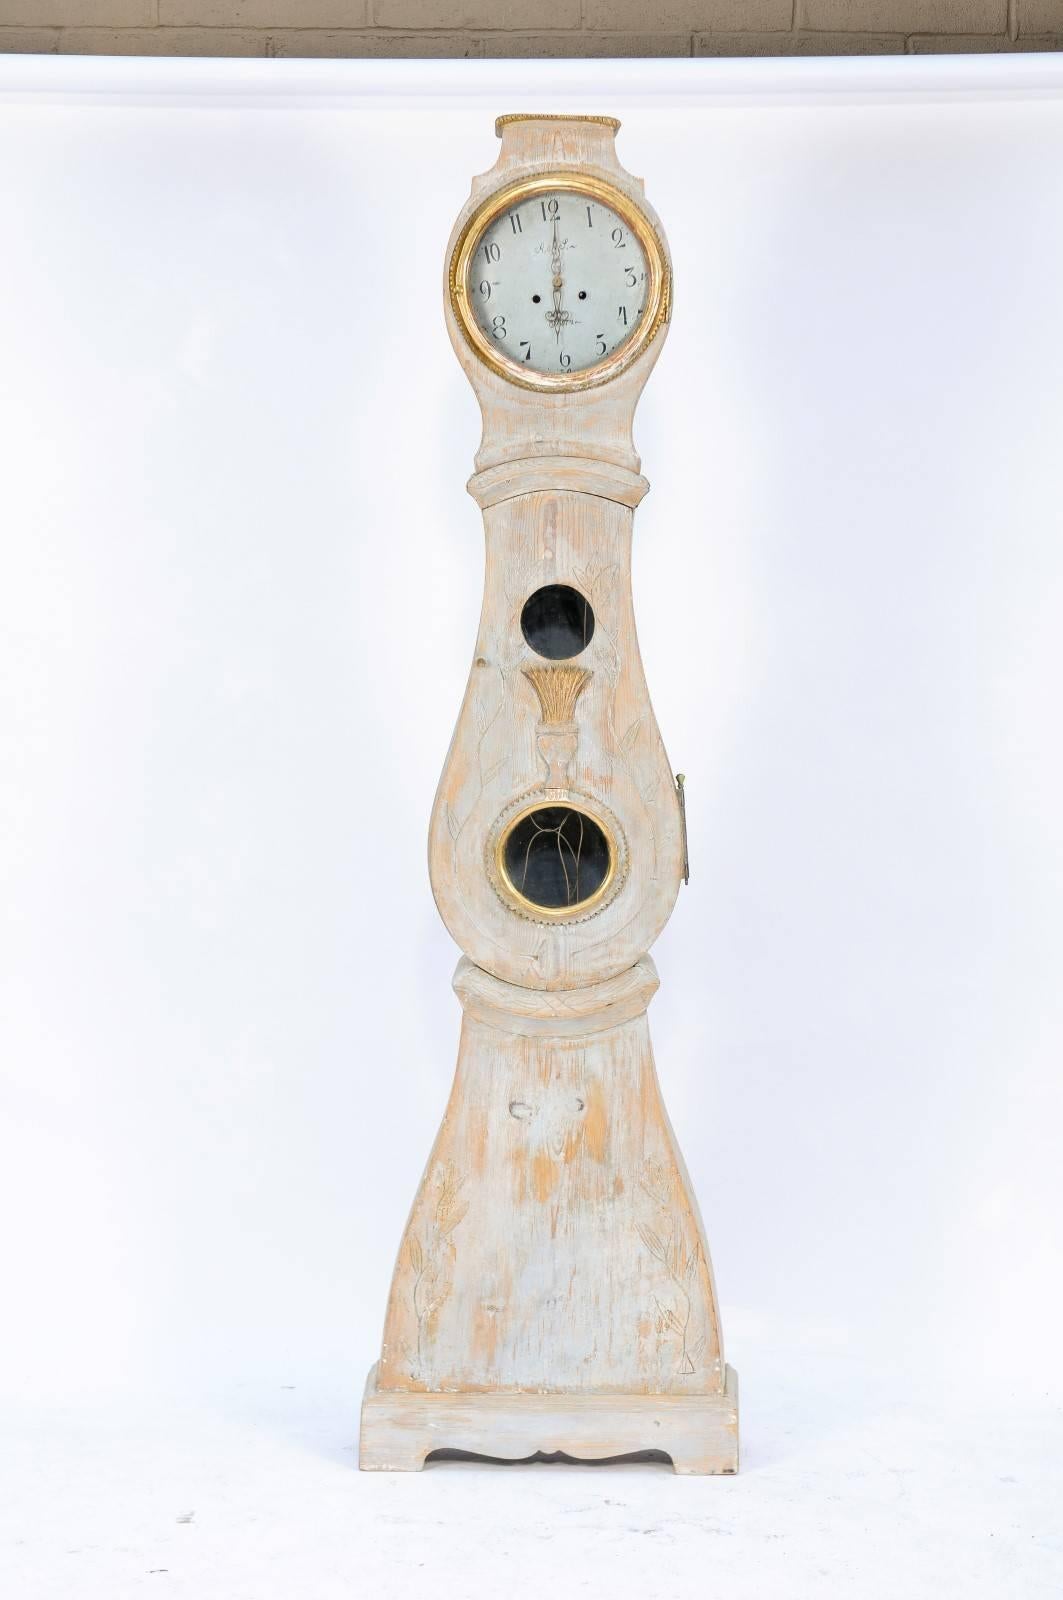 A Swedish painted wooden Mora clock from the mid-19th century with gilded accents. We fell in love with this charming piece at an antiques fair in France. With its sophisticated patina, neat lines, a rounded head and “belly” and an elegant clock